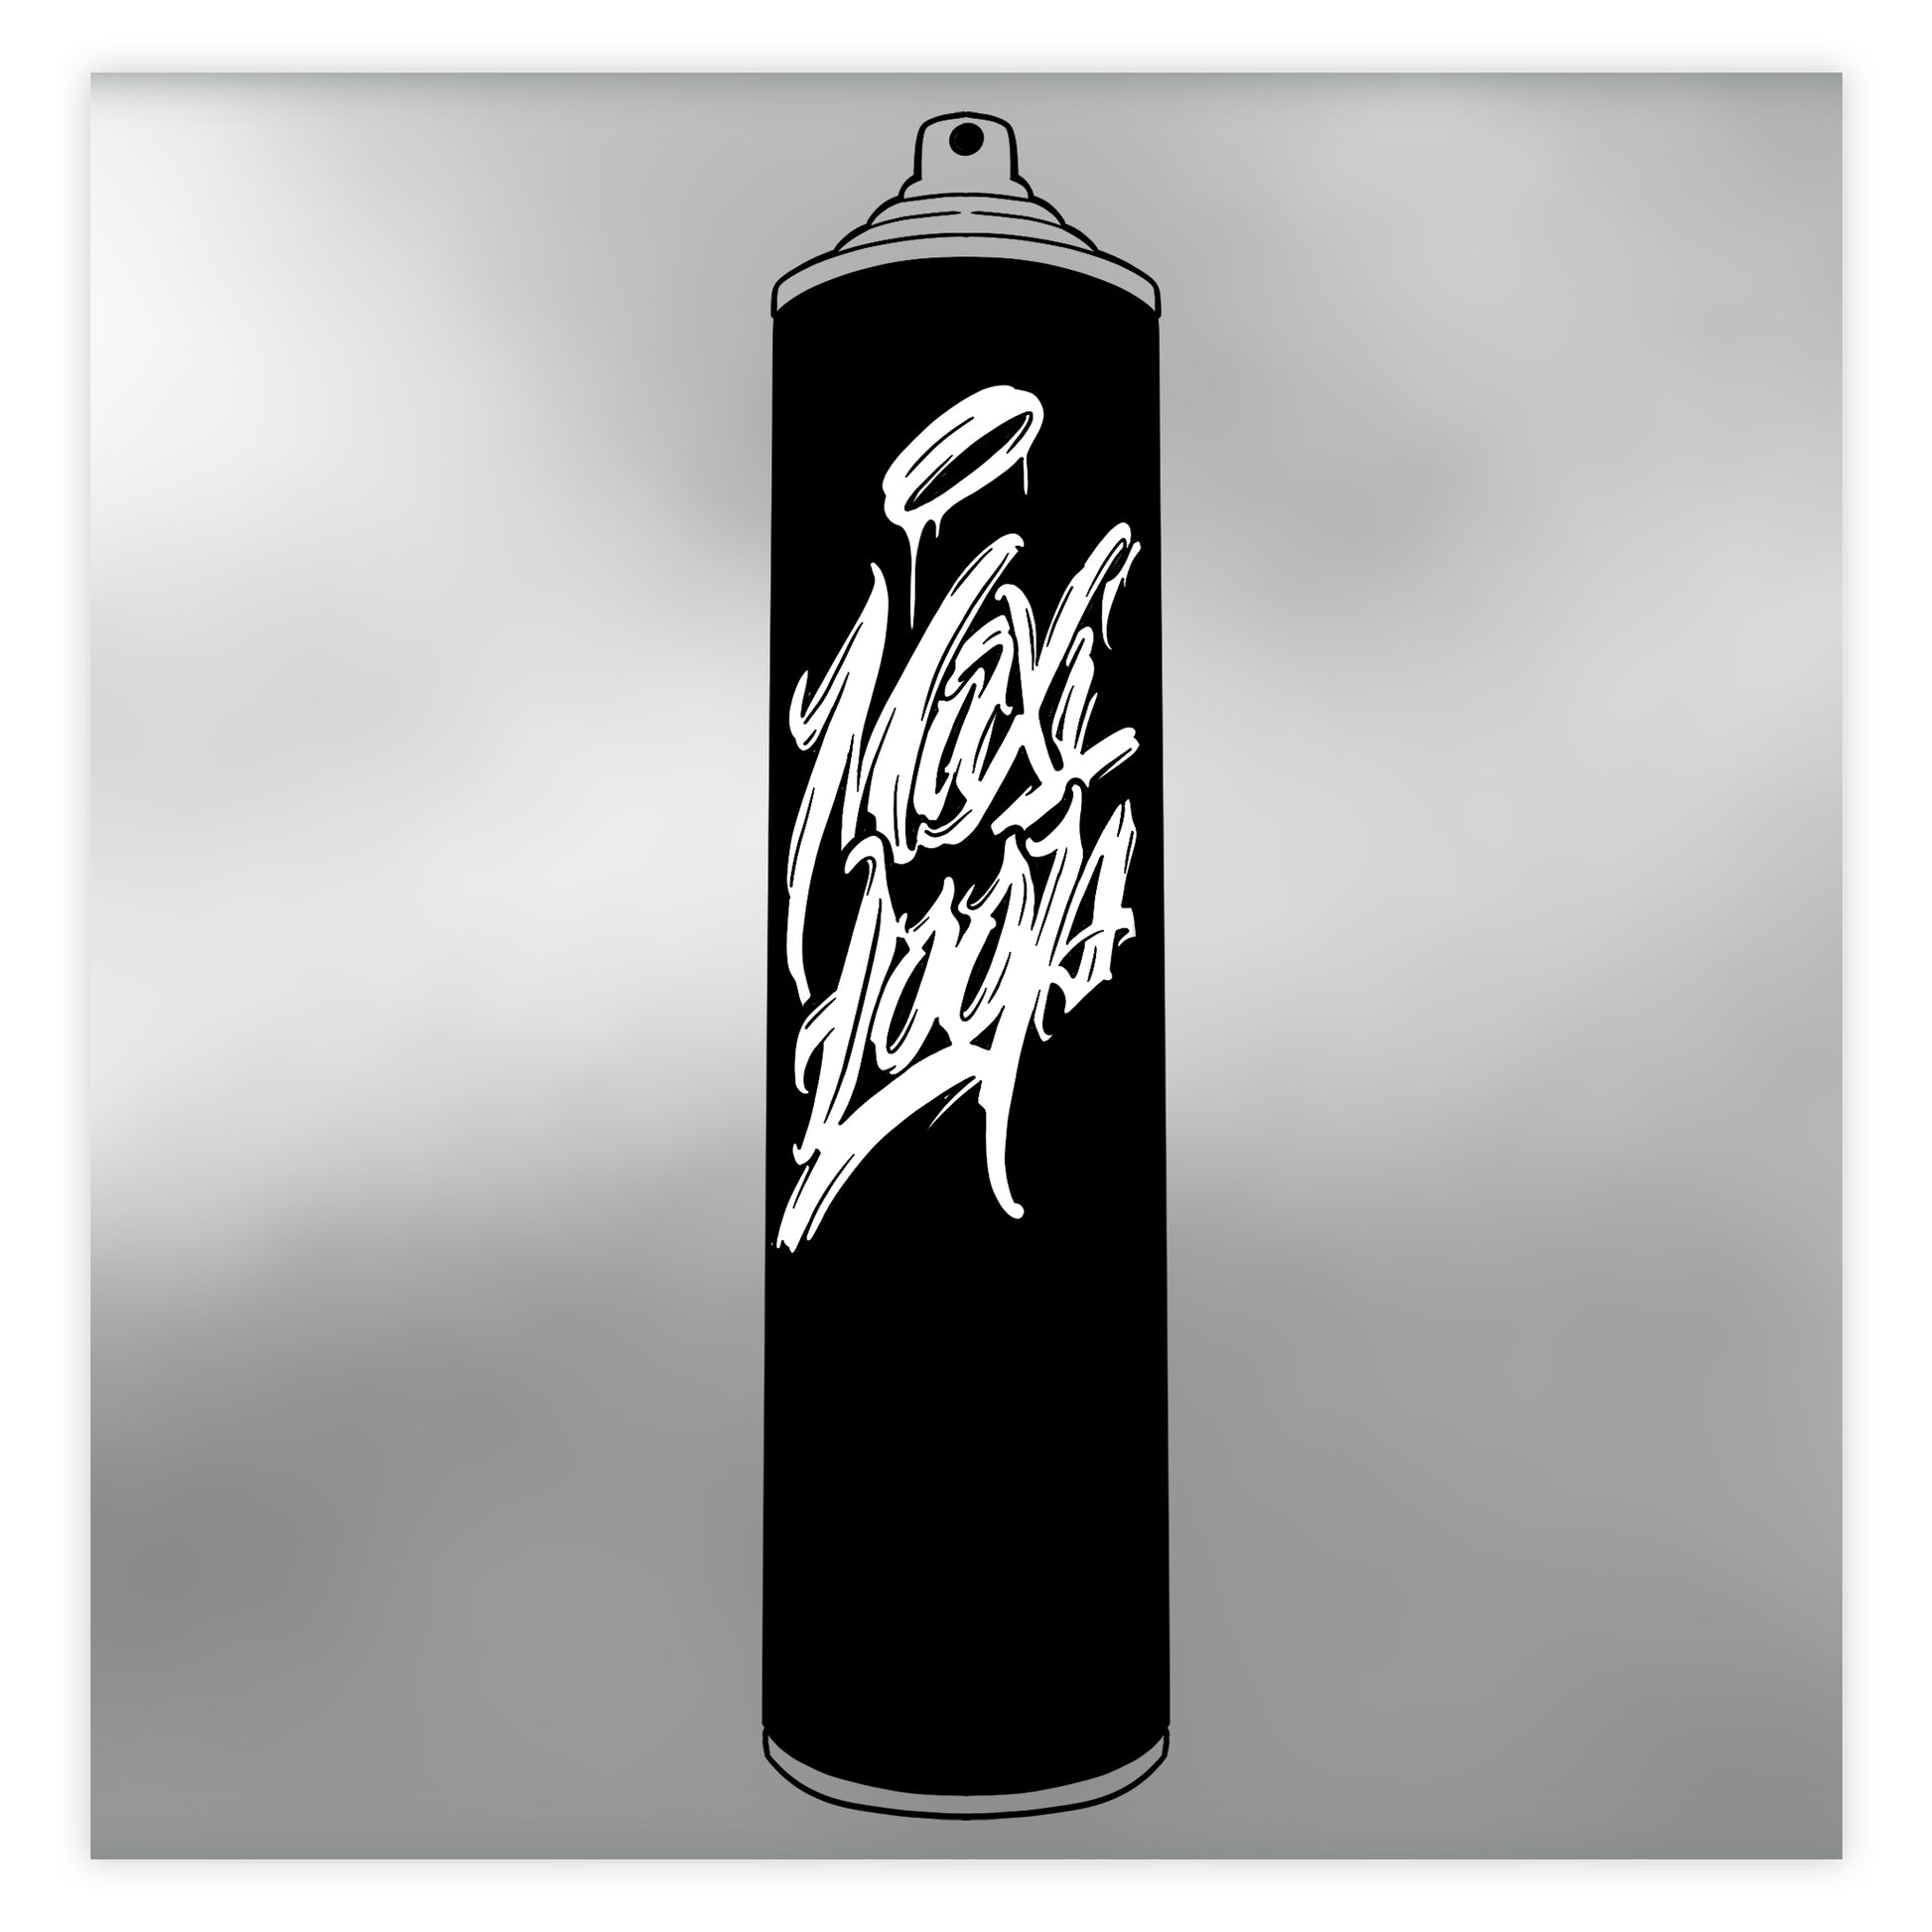 Loop maxi artist spray paint in color chrome silver.